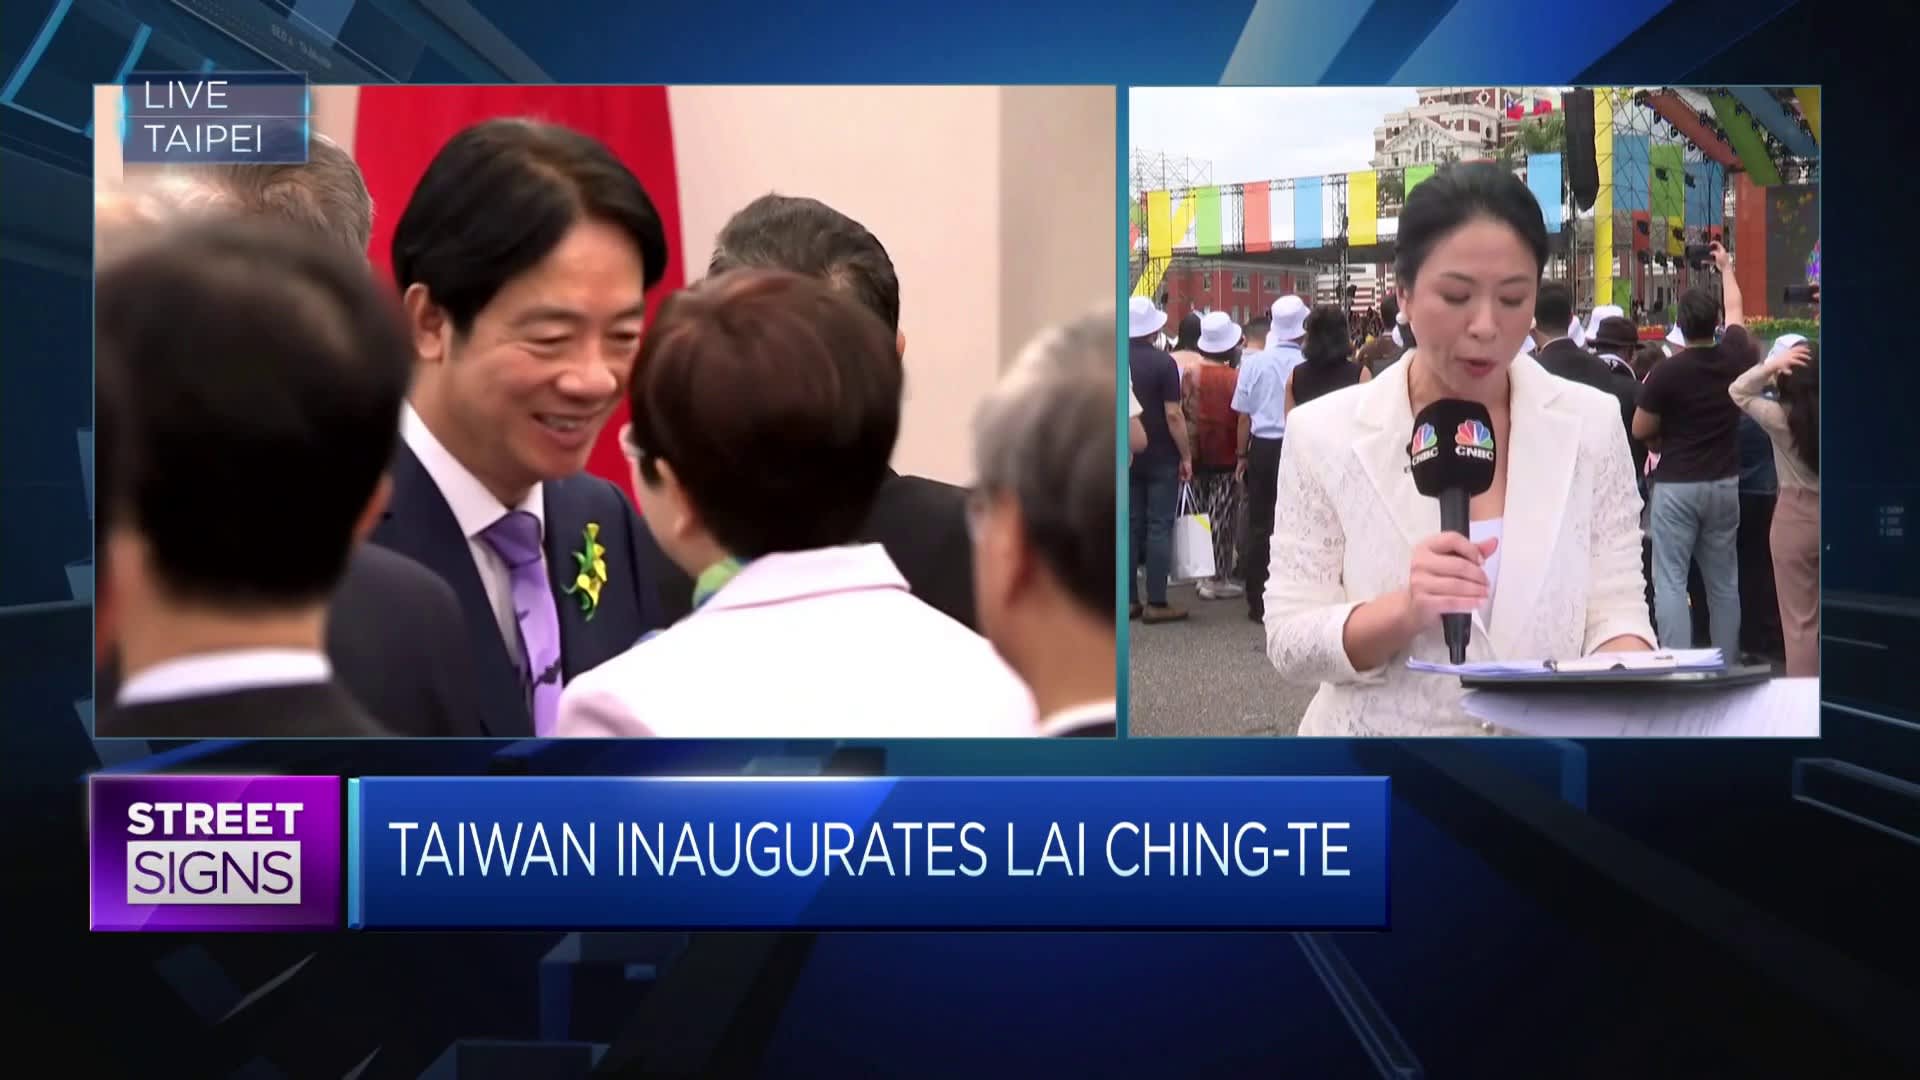 Taiwan's new President Lai Ching-te has been sworn in